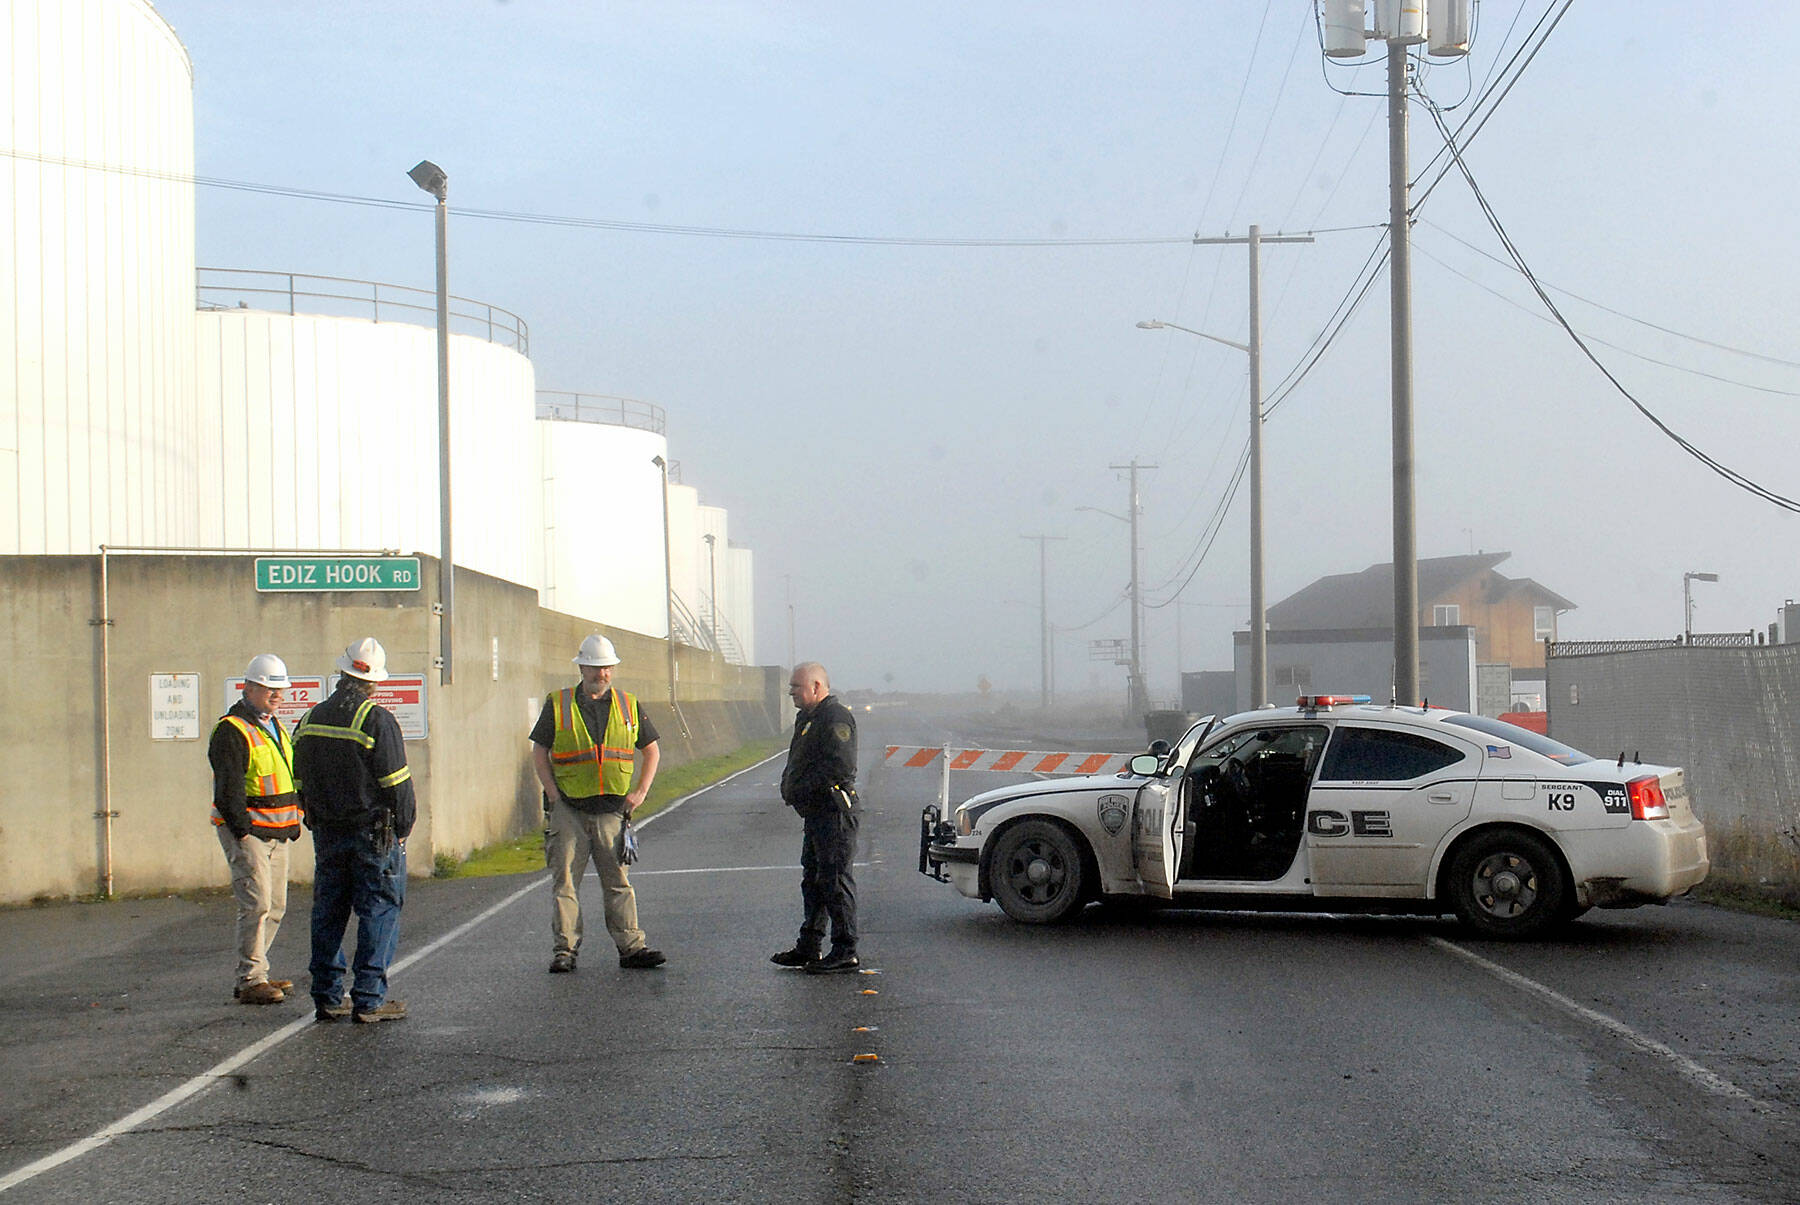 Port Angeles police Sgt. Kevin Miller, right, speaks with officials ot the McKinley Paper Co., as his police cruiser blocks Ediz Hook Road after as the hook was being evacuated during a tsunami advisory on Saturday morning. (Keith Thorpe/Peninsula Daily News)